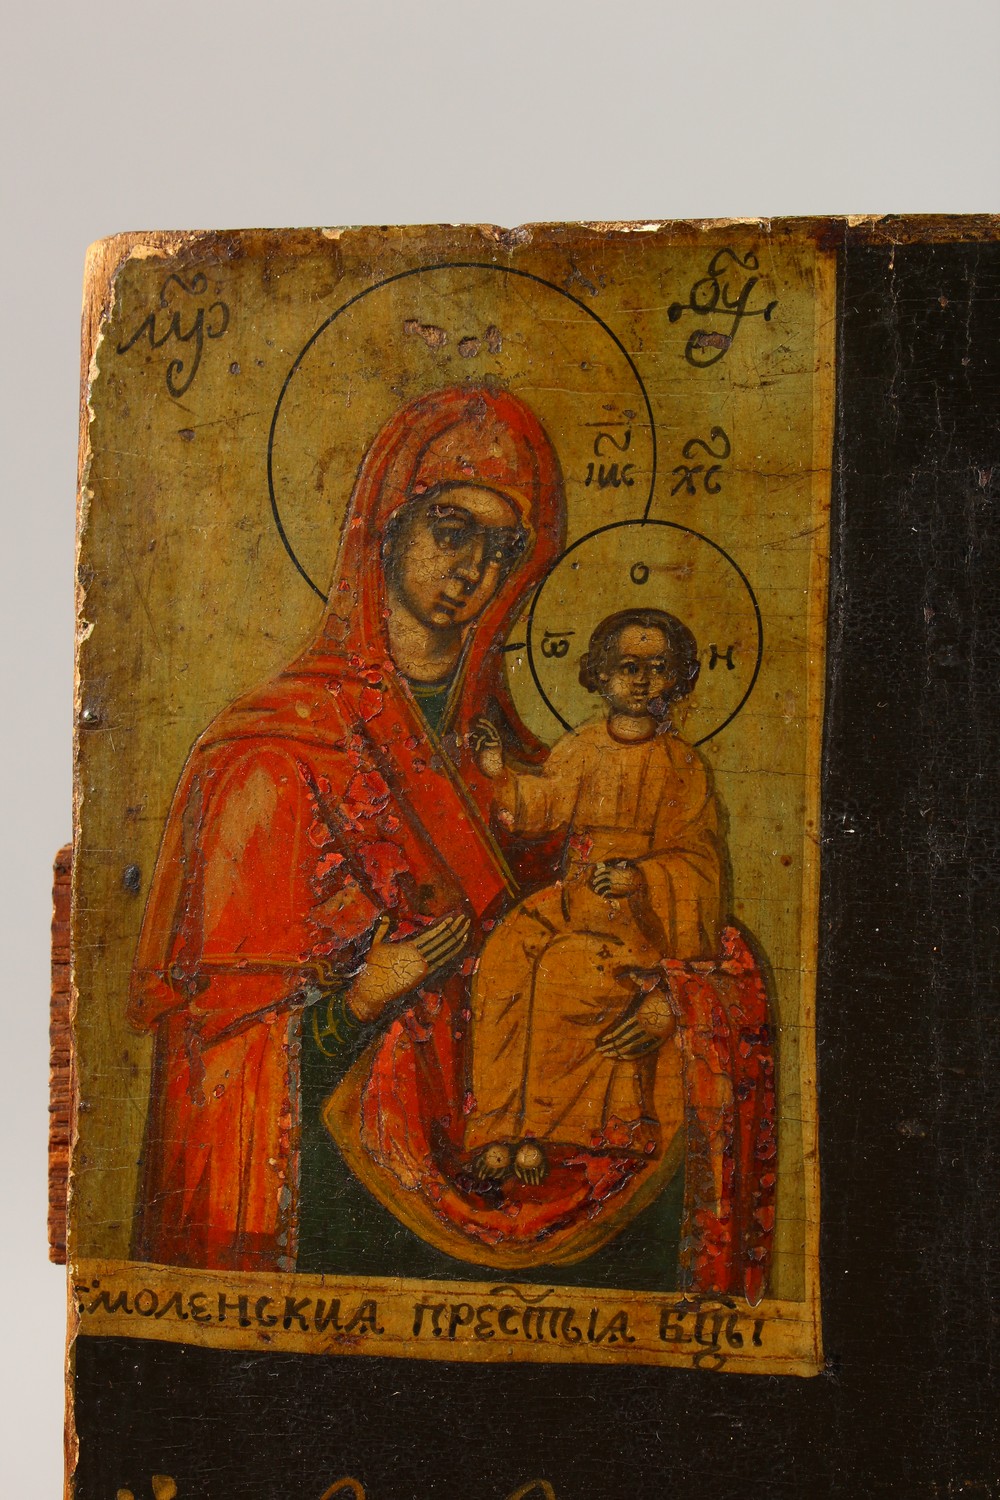 A RUSSIAN ICON. SAINT MITROFAN OF VORONEZH (1623-1703), on wood. See label on reverse. 15.5ins x - Image 2 of 10